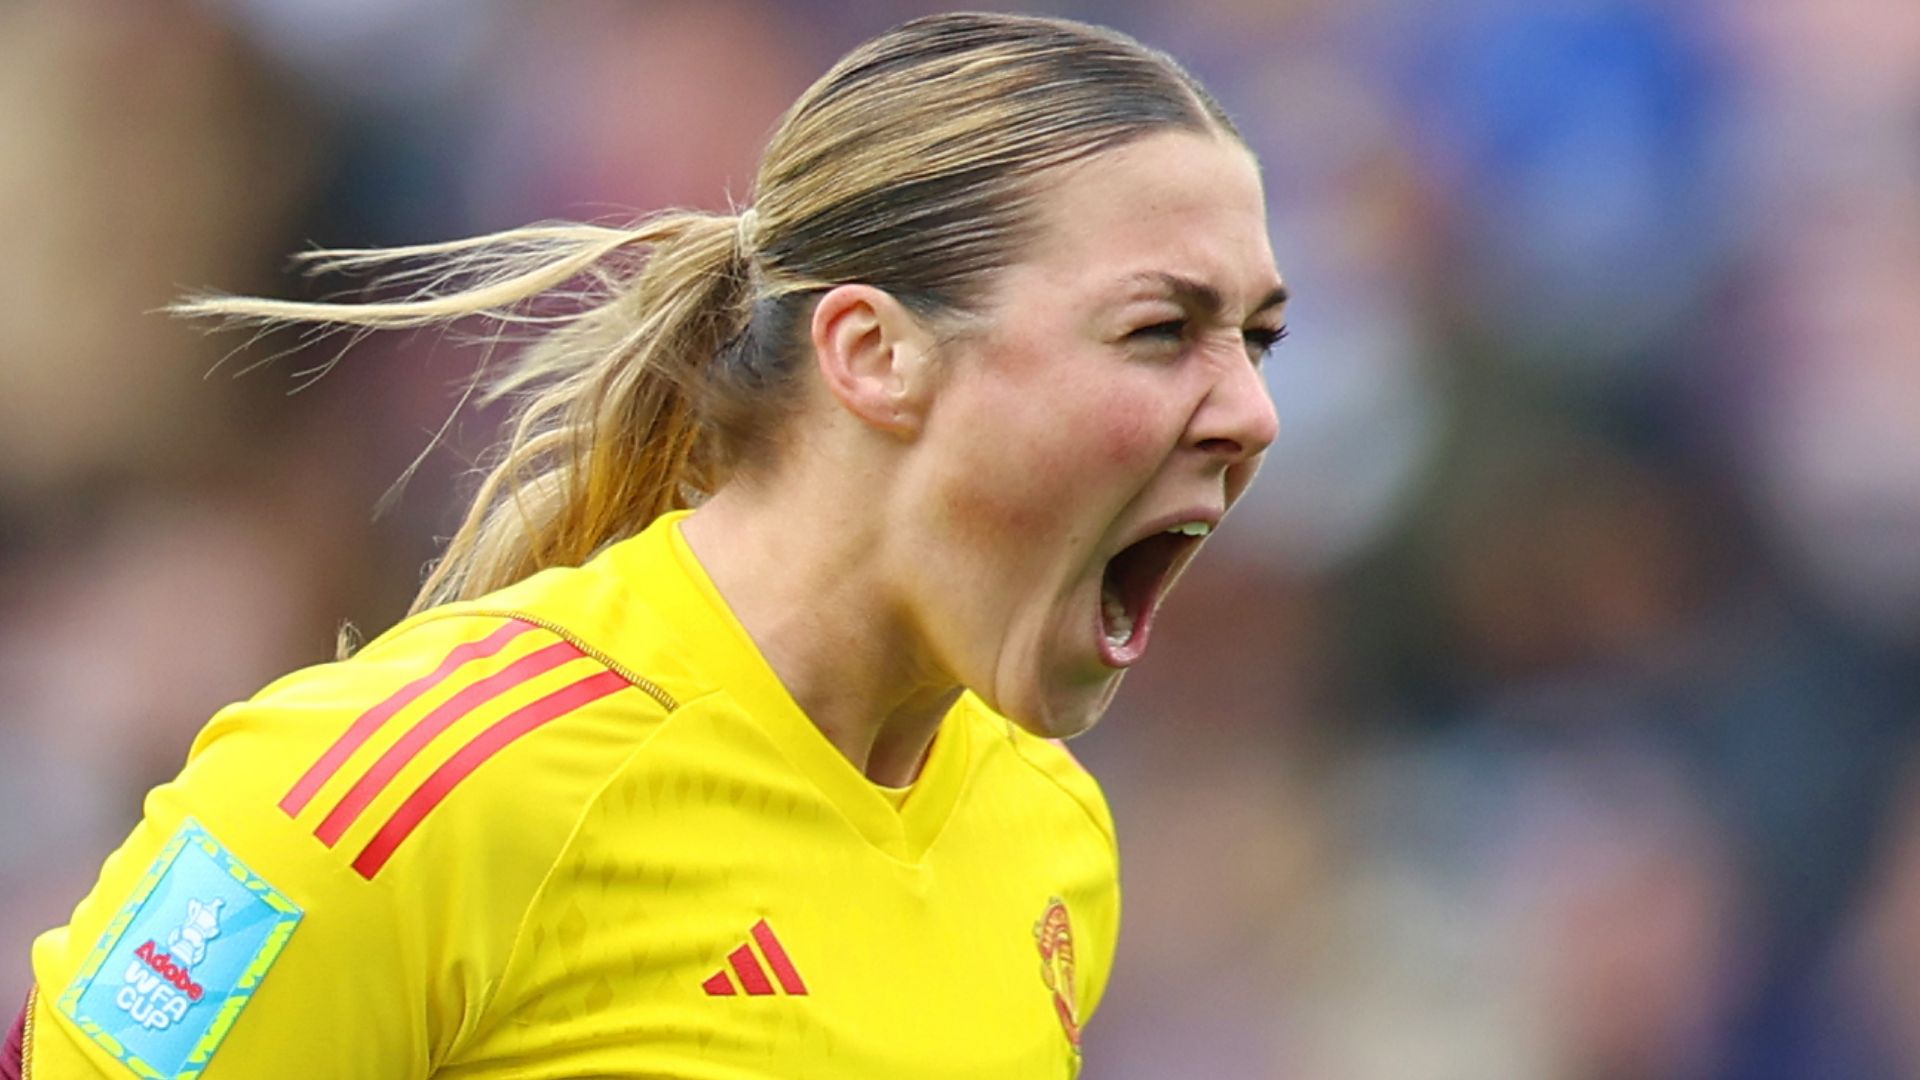 was mary earps motivated by england snub? man utd goalkeeper labelled 'a realist' after heroics in fa cup semi-final win over chelsea as marc skinner hails her 'beautiful character'